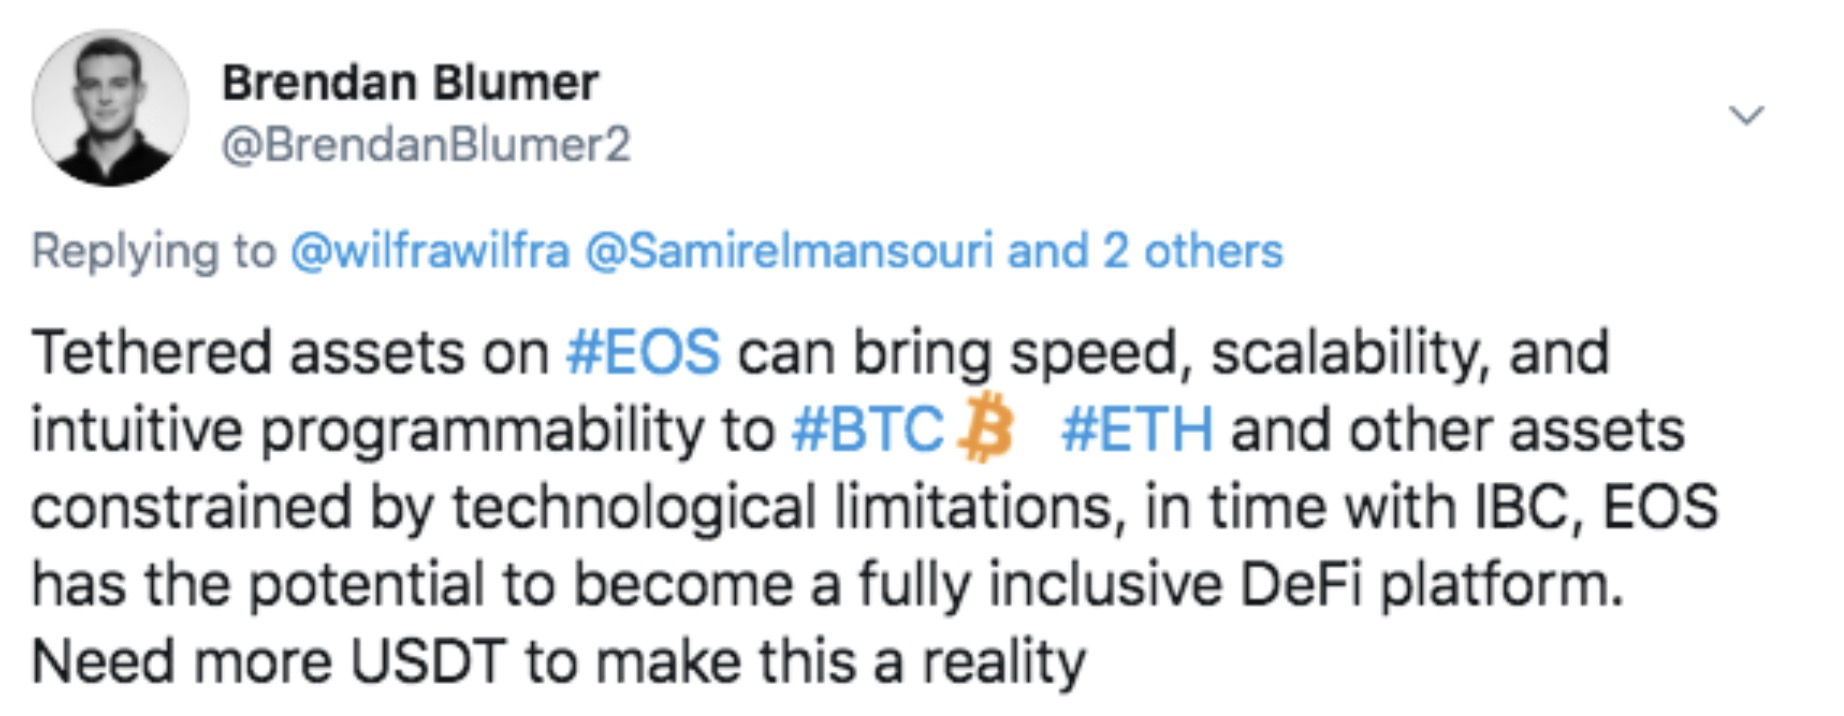 the-possibility-for-defi-on-eos-4